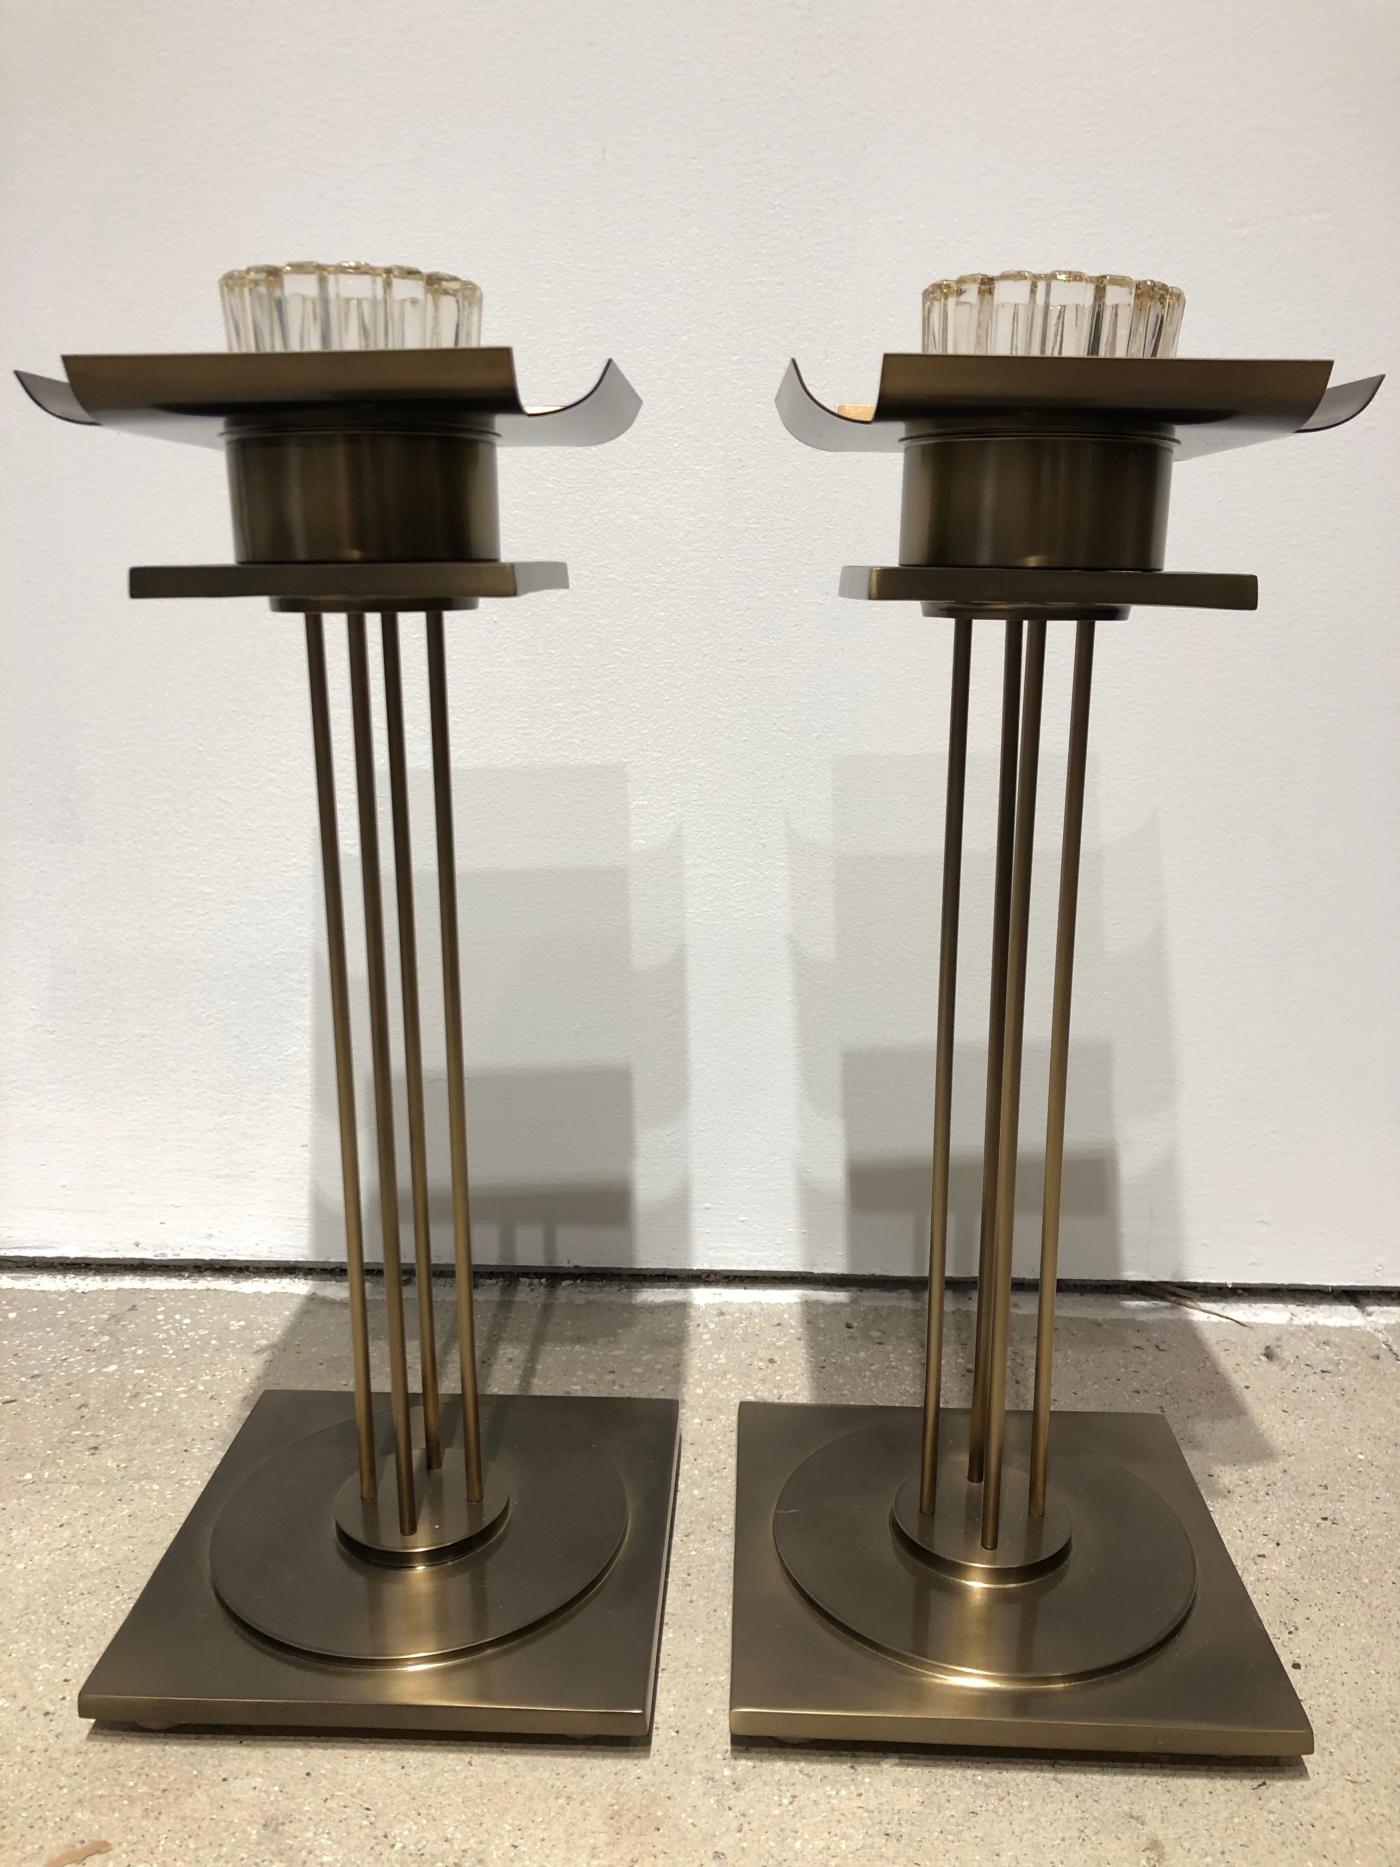 Pair of Mid Century Modern Candle Holders.